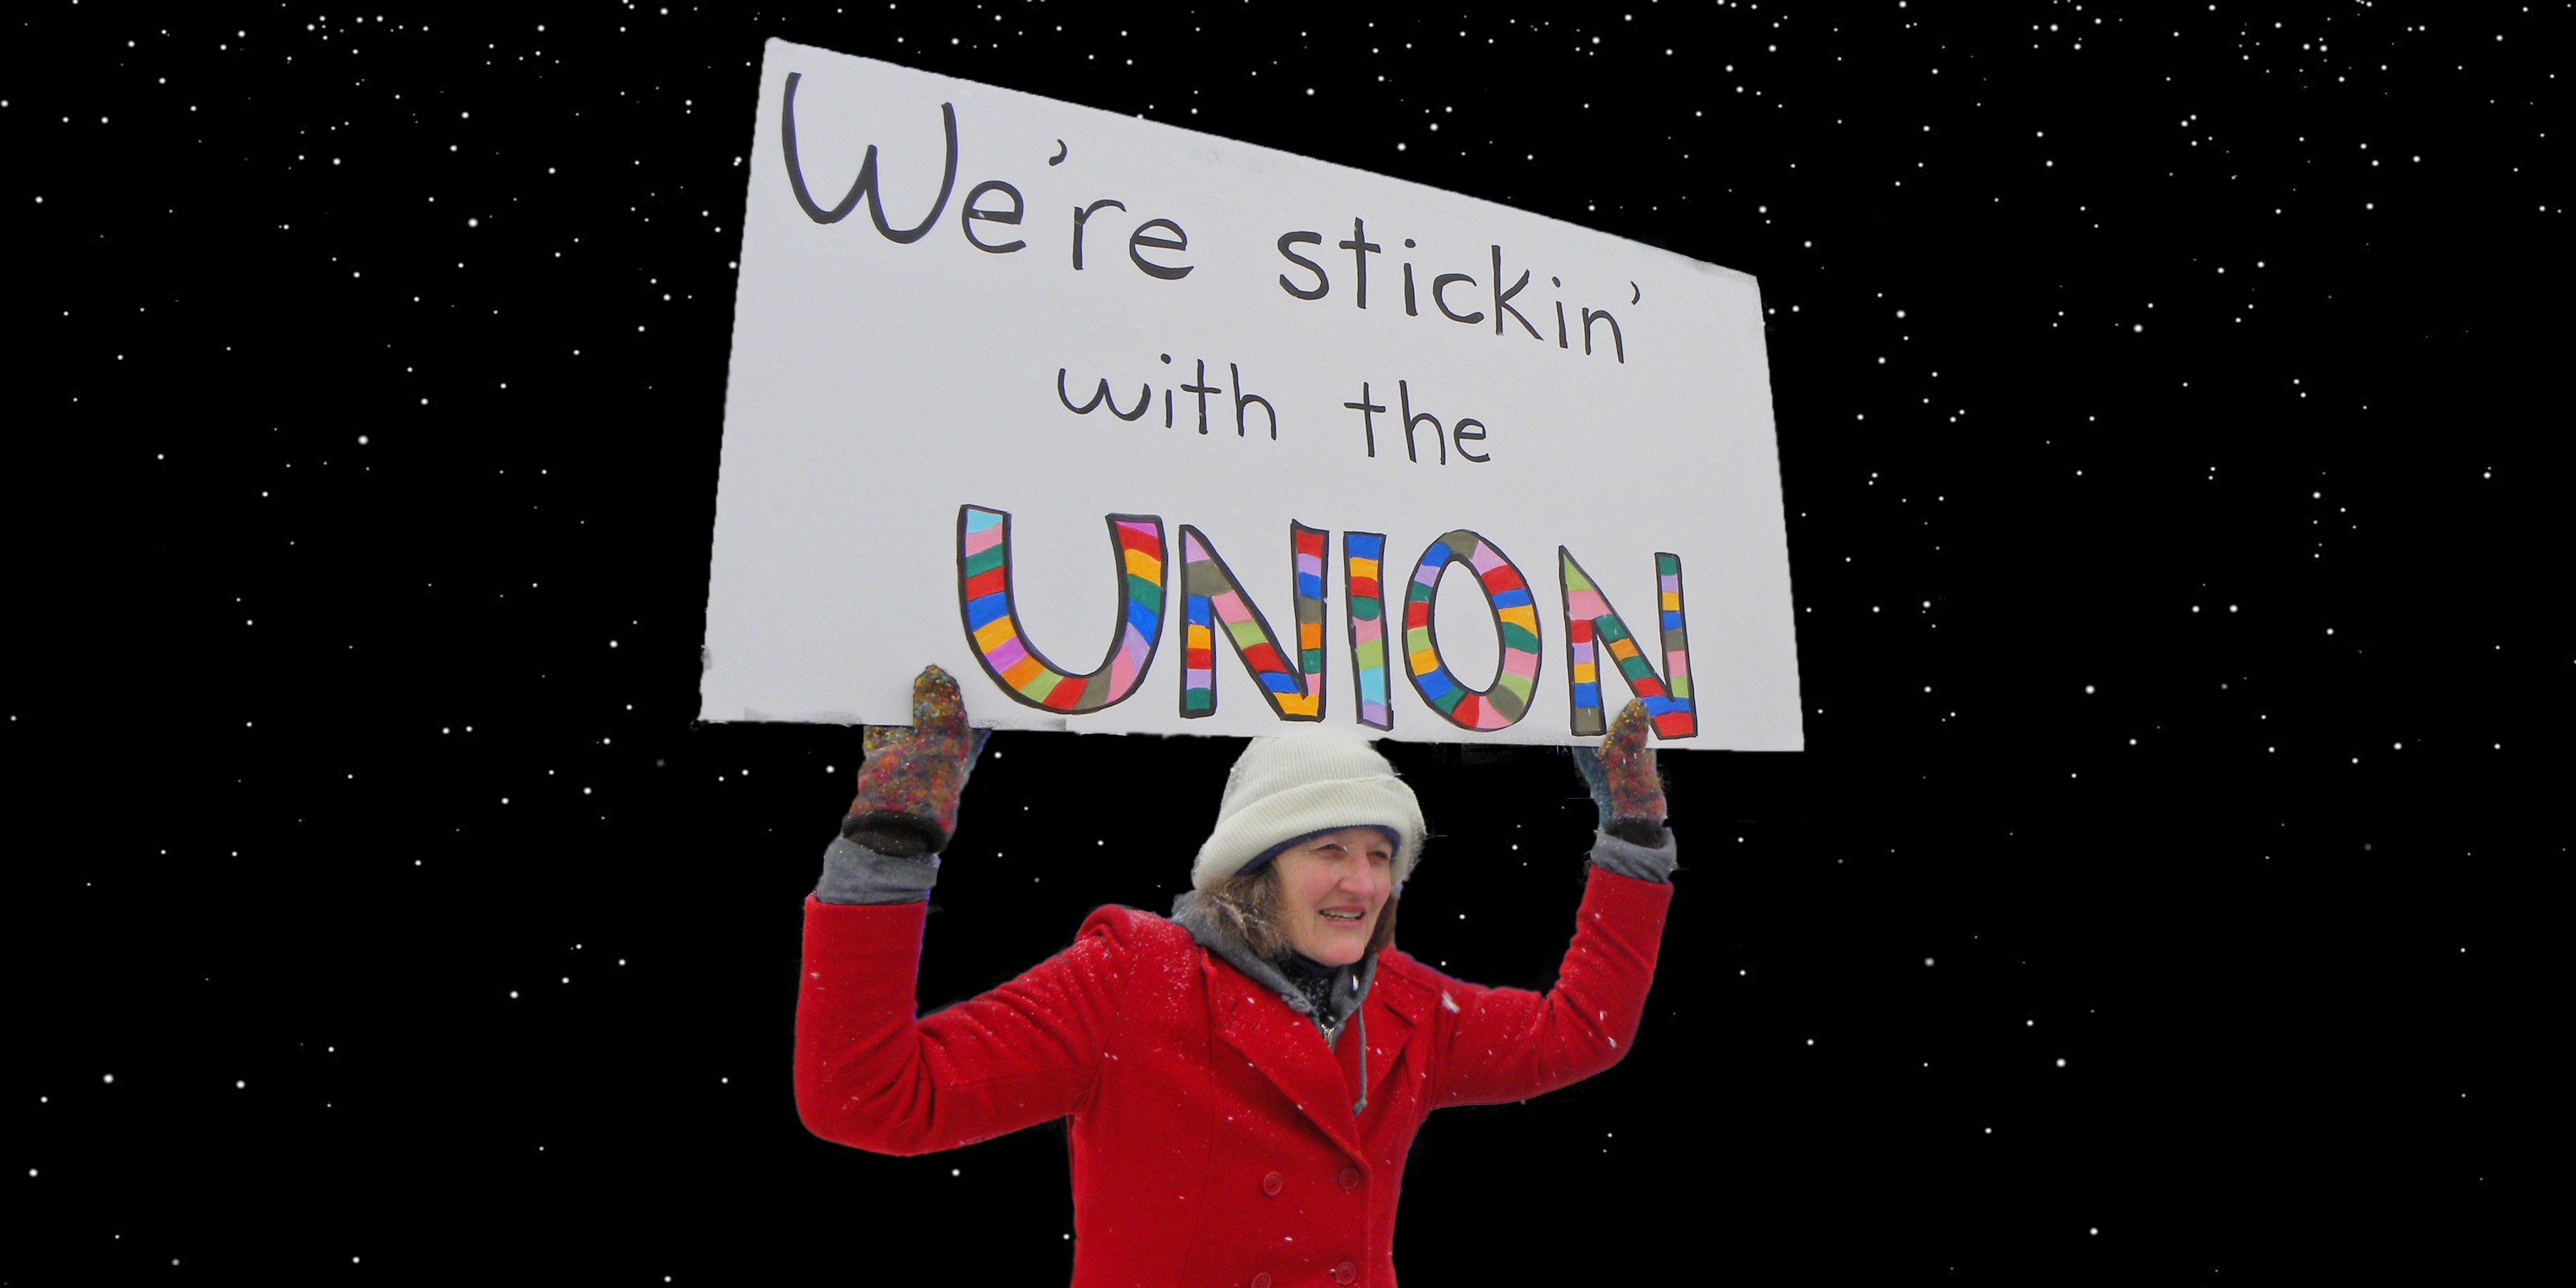 Union worker with sign